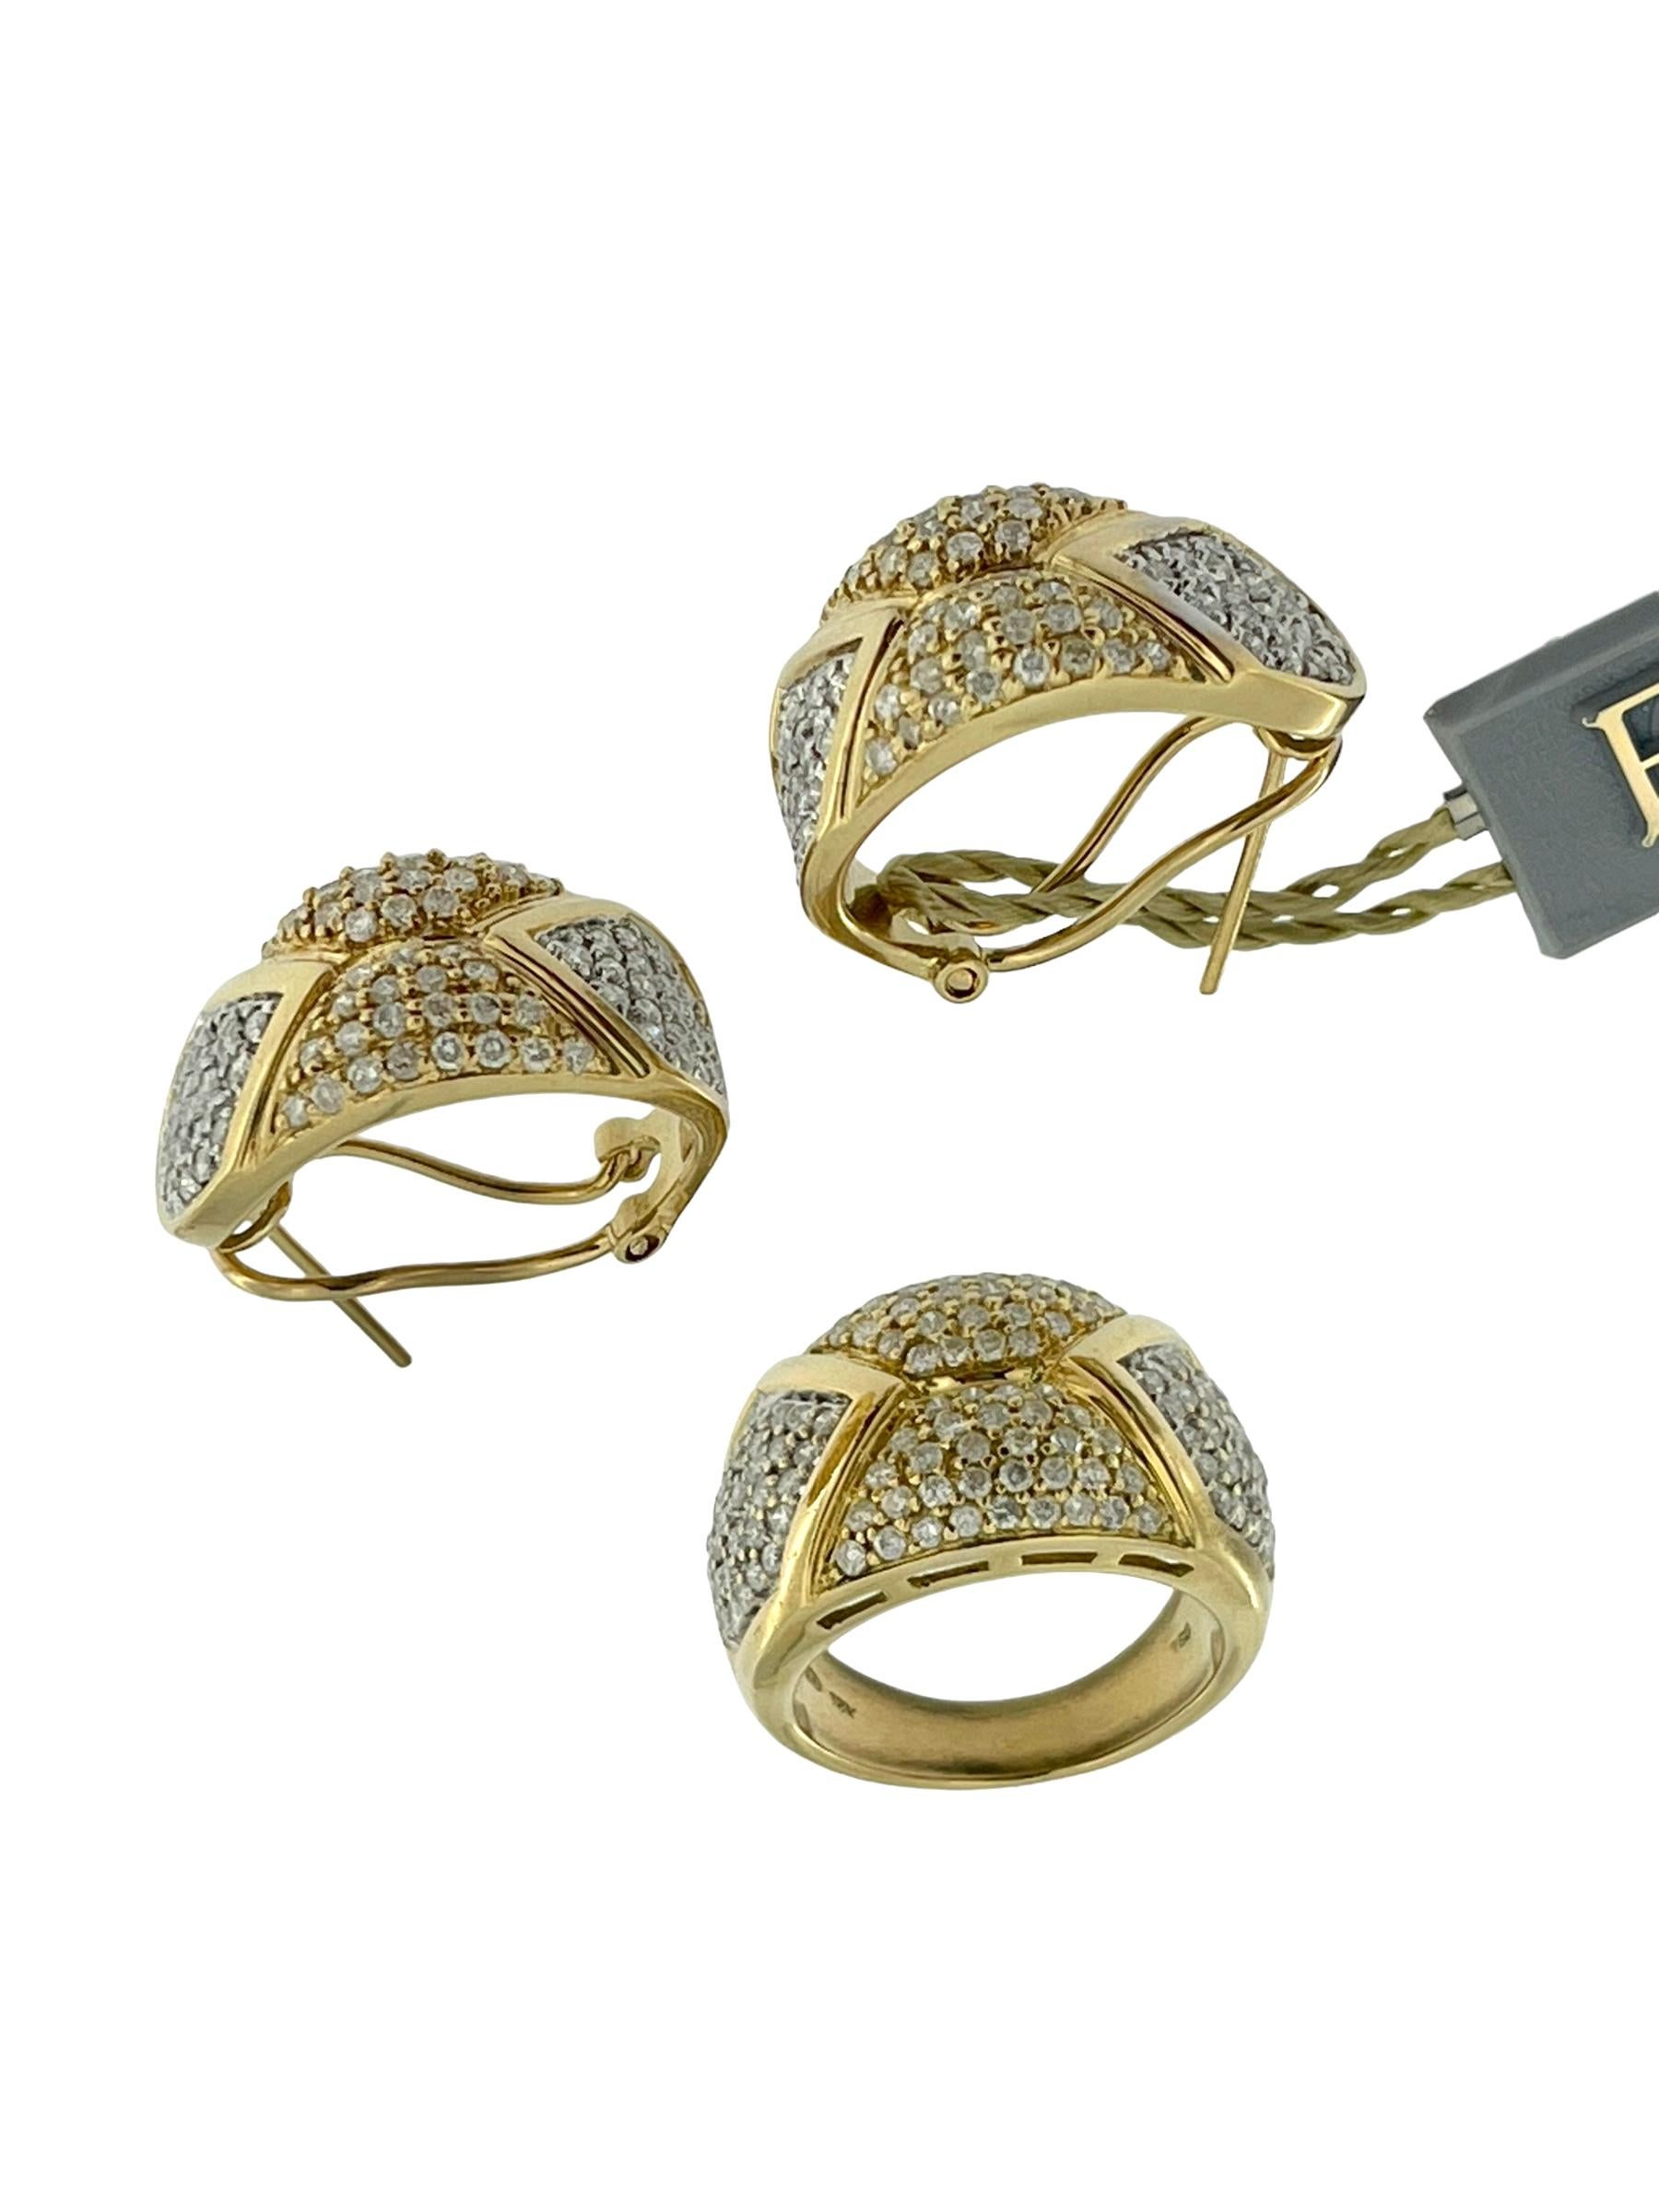 Modern French Jewelry Set Earrings and Ring Gold and Diamonds For Sale 2